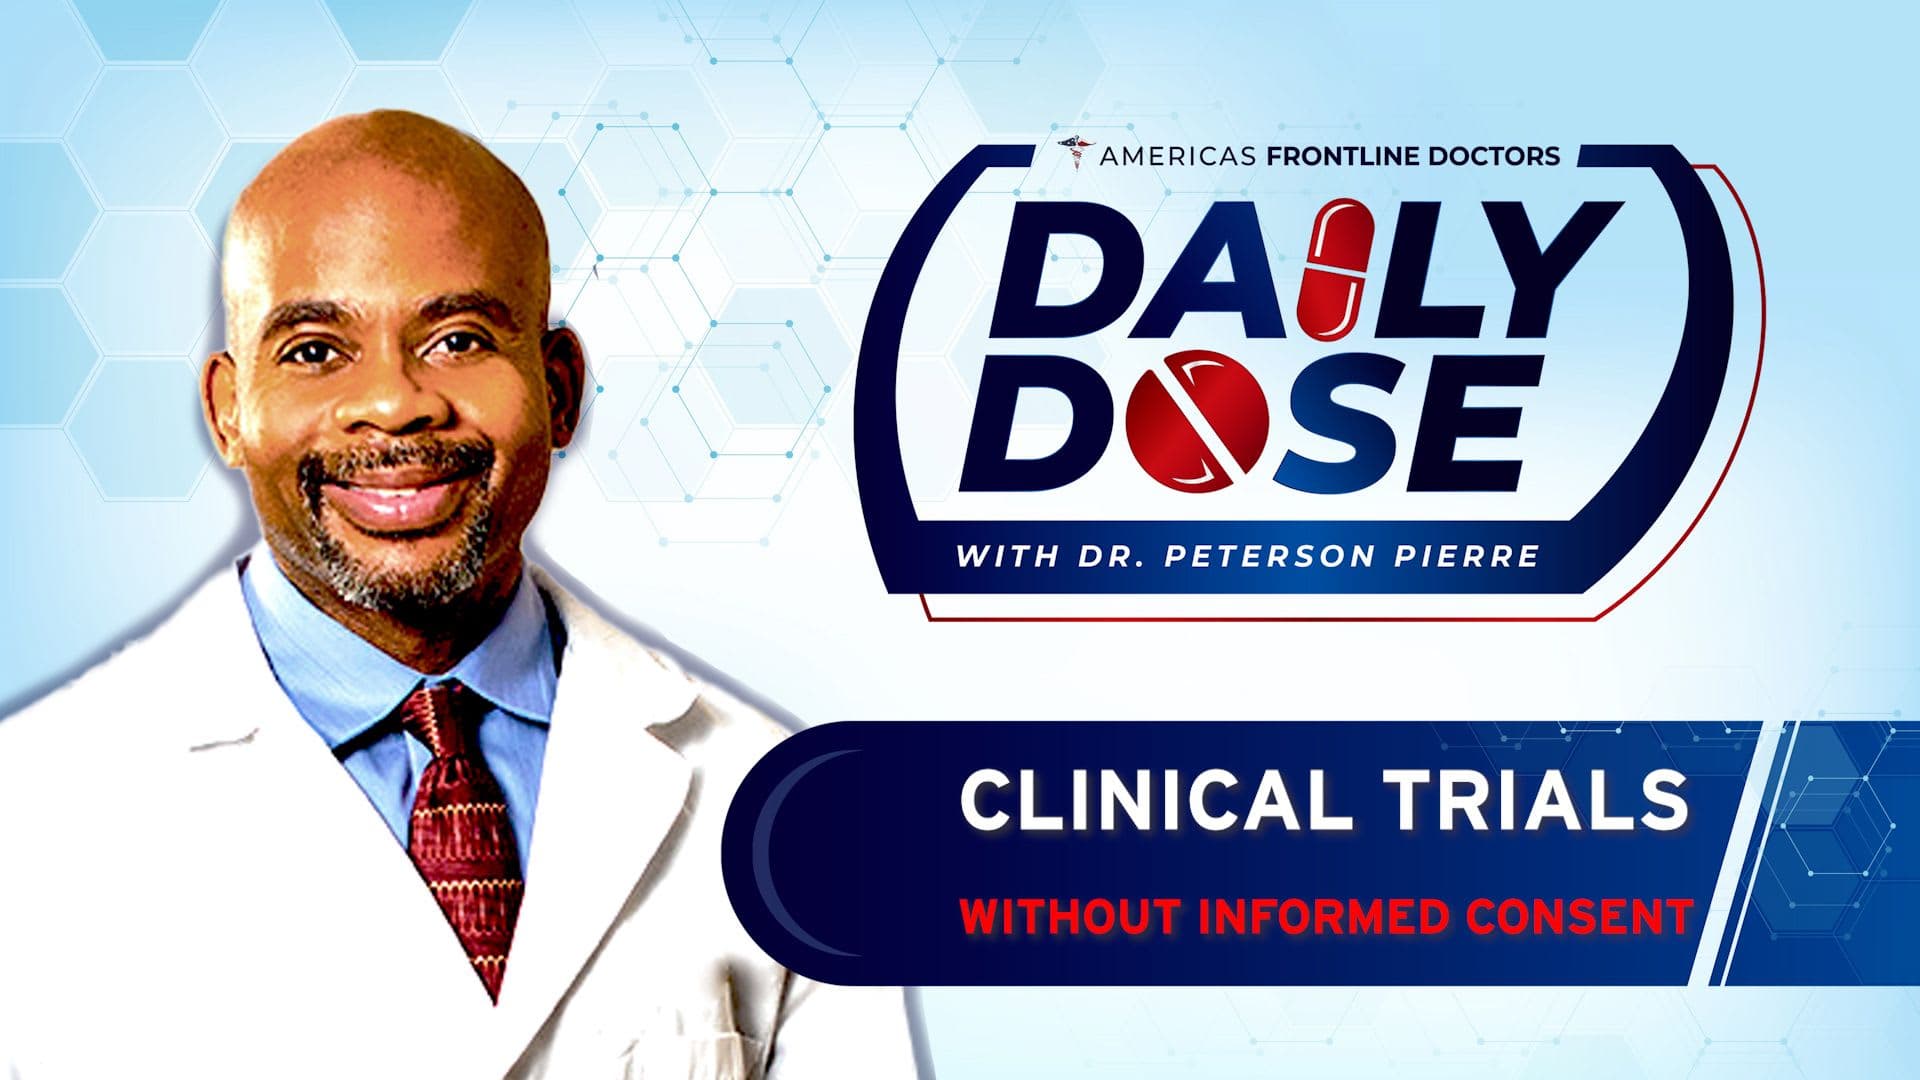 Daily Dose: 'Clinical Trials Without Informed Consent' with Dr. Peterson Pierre